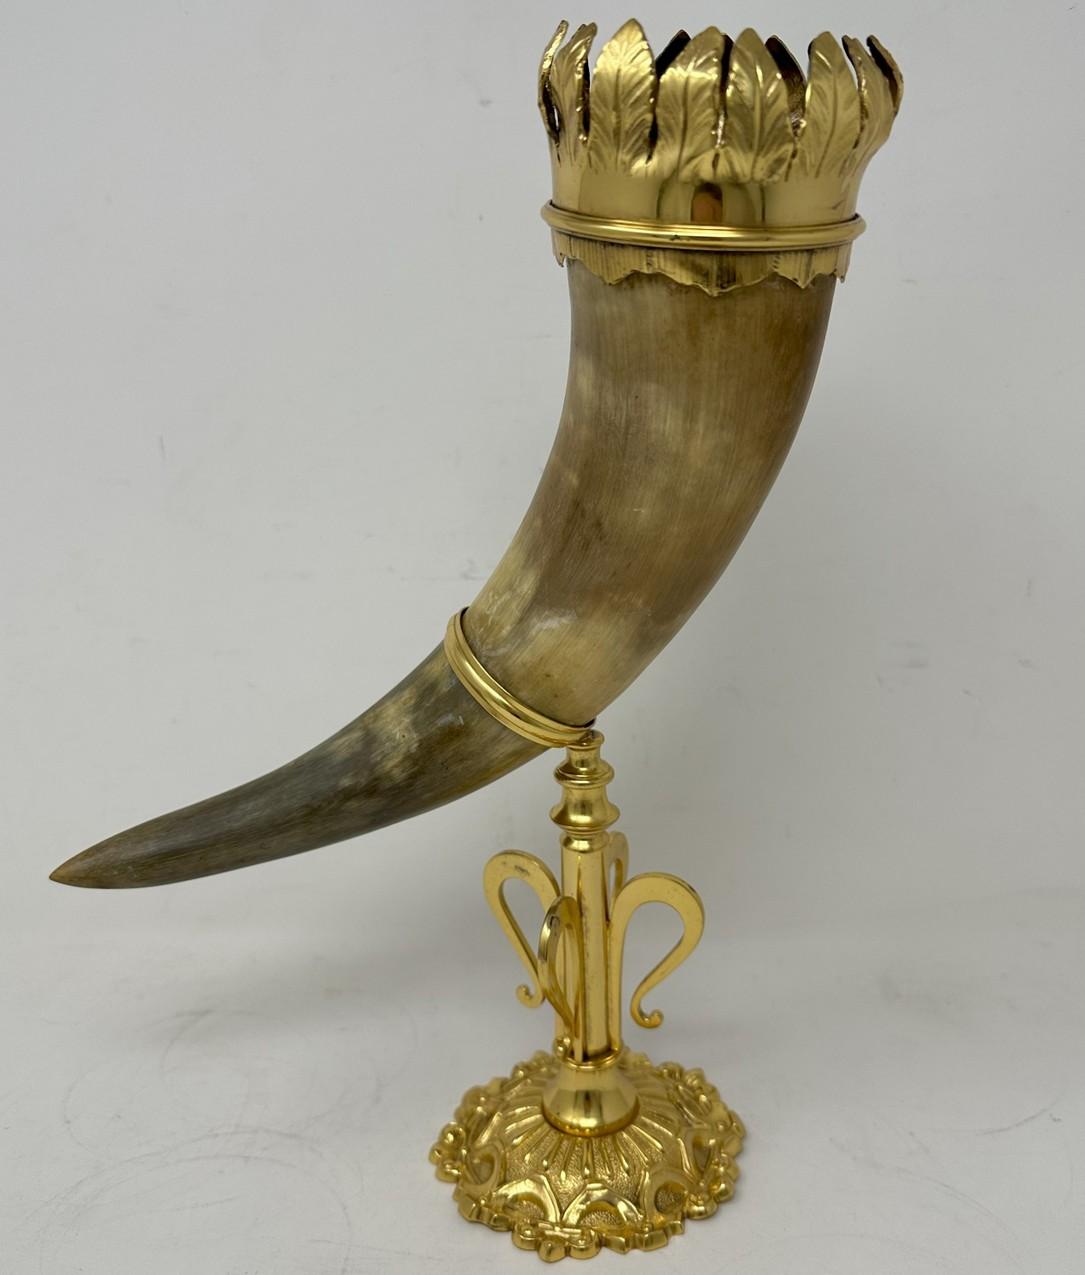 A superb example of a German Cow Horn of plenty Cornucopia   

decorative Vase or Centerpiece, firmly attributed to the World-famous silver manufacturers Württembergische Metallwarenfabrik commonly called WMF.  Circa 1900. 

The unusually large horn